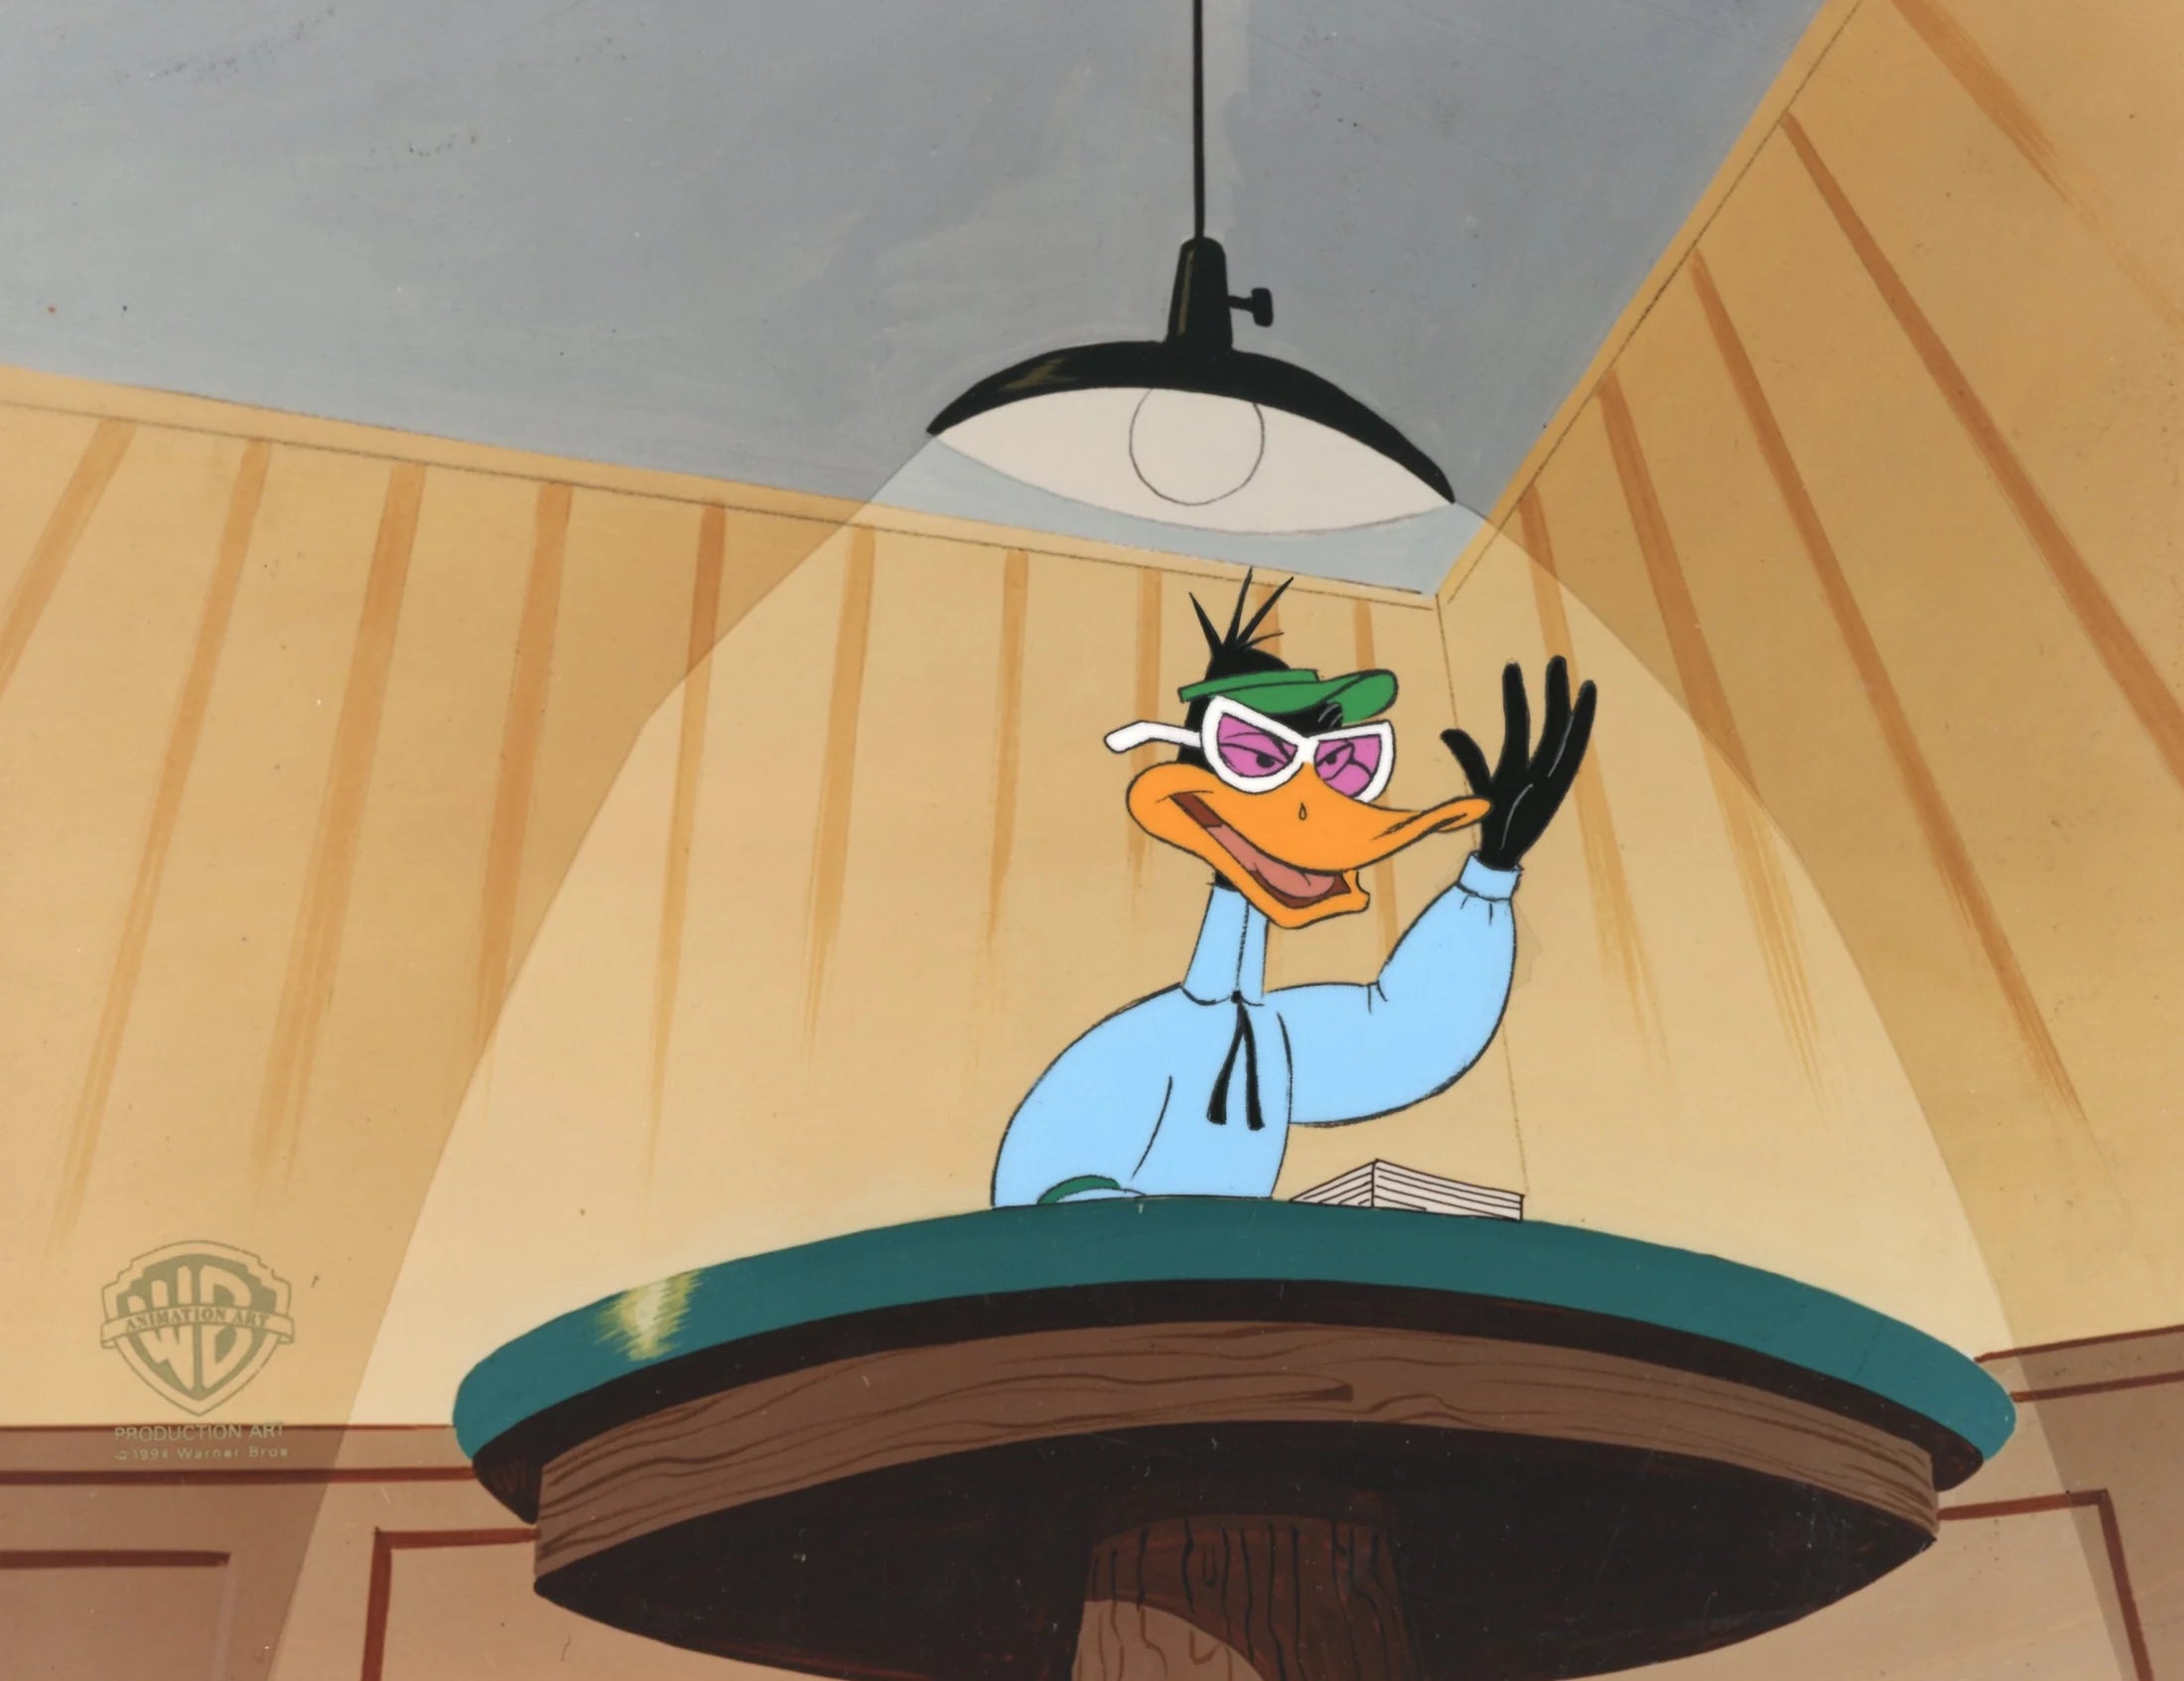 Daffy Duck - auctioneer in the spot light